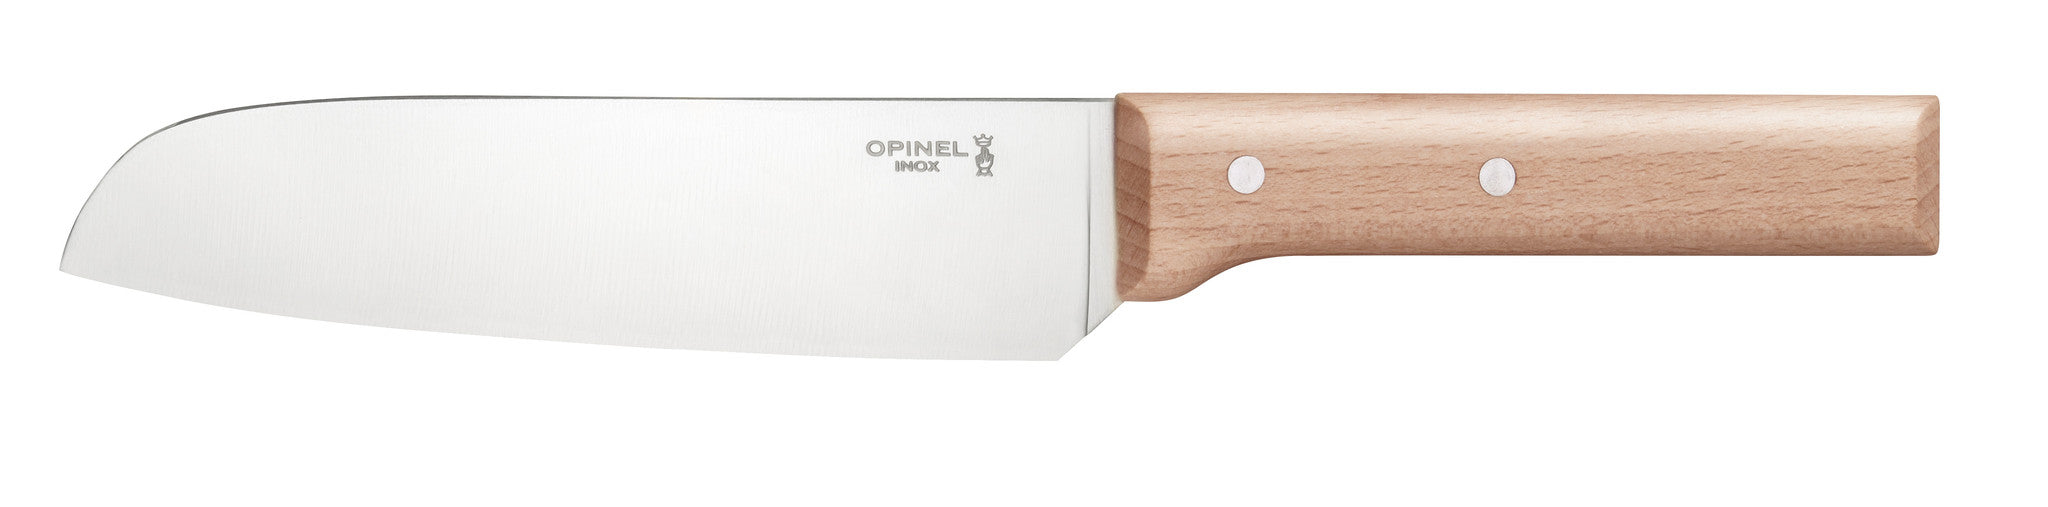 Opinel Stainless Steel Classic Santoku Knife No.119